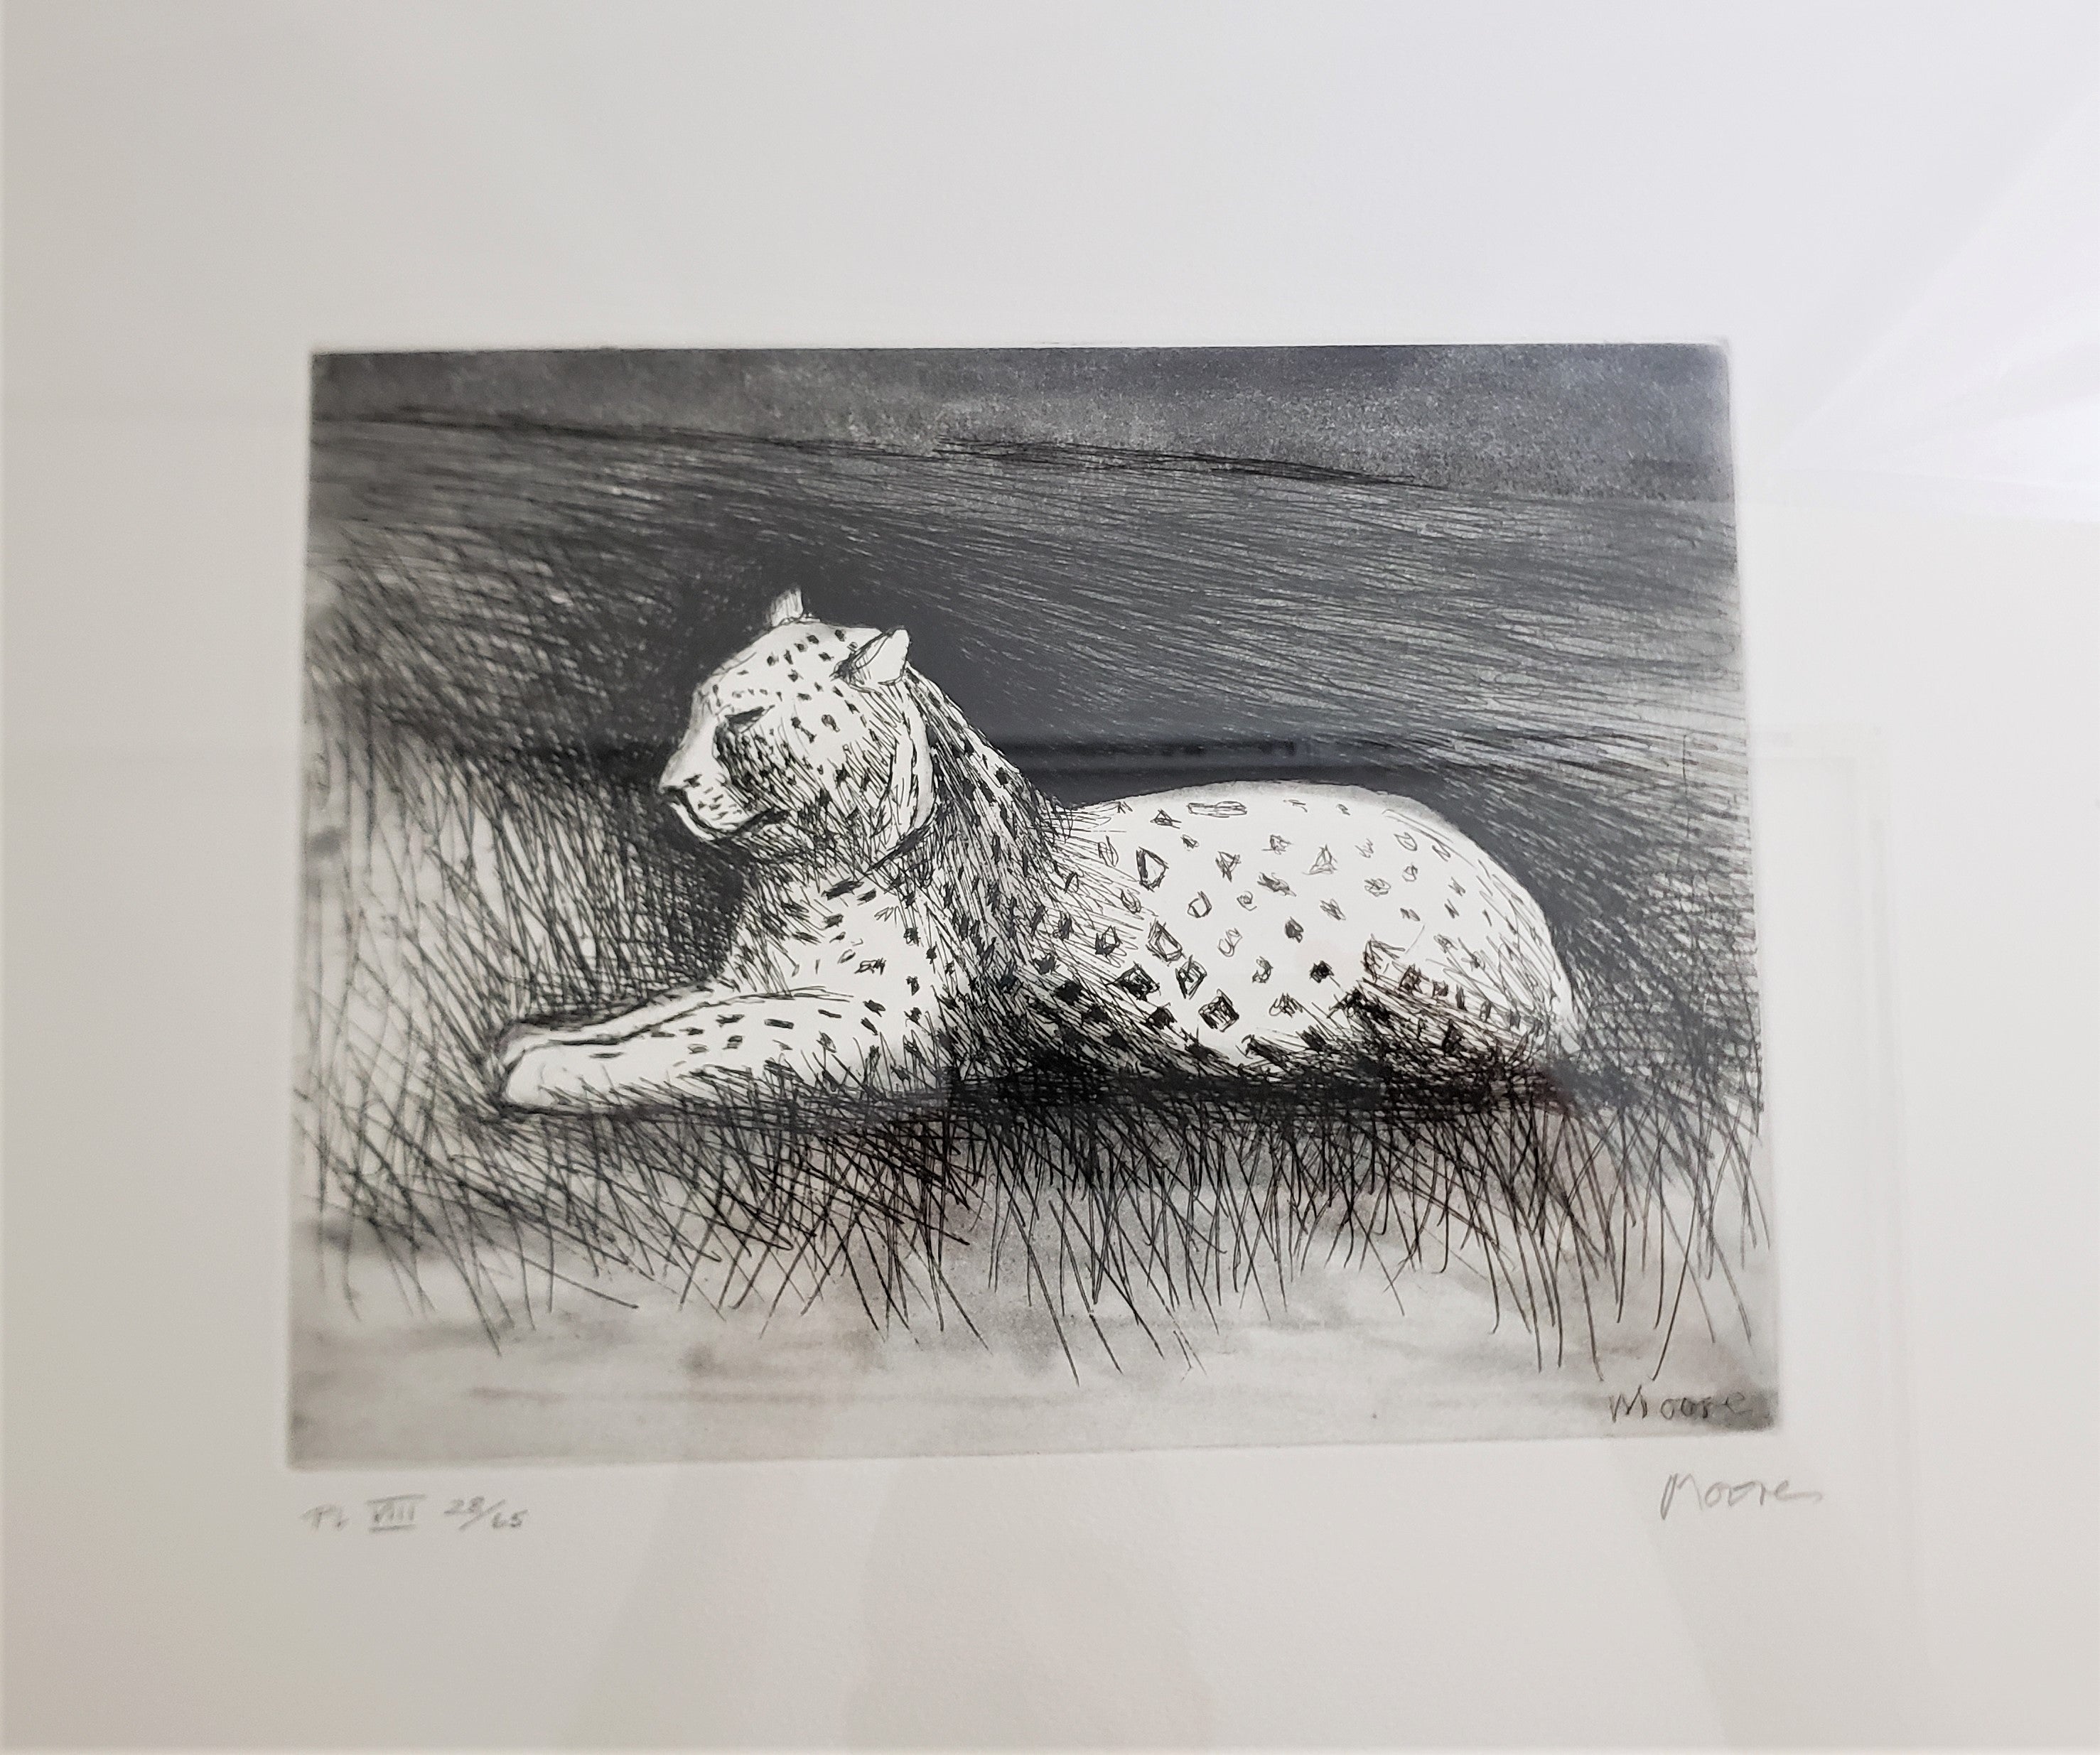 This signed and numbered lithograph was done by the very well known British artist and sculptor Henry Moore in approximately 1980-1982 in his Modernist style. This lithograph comes from his 